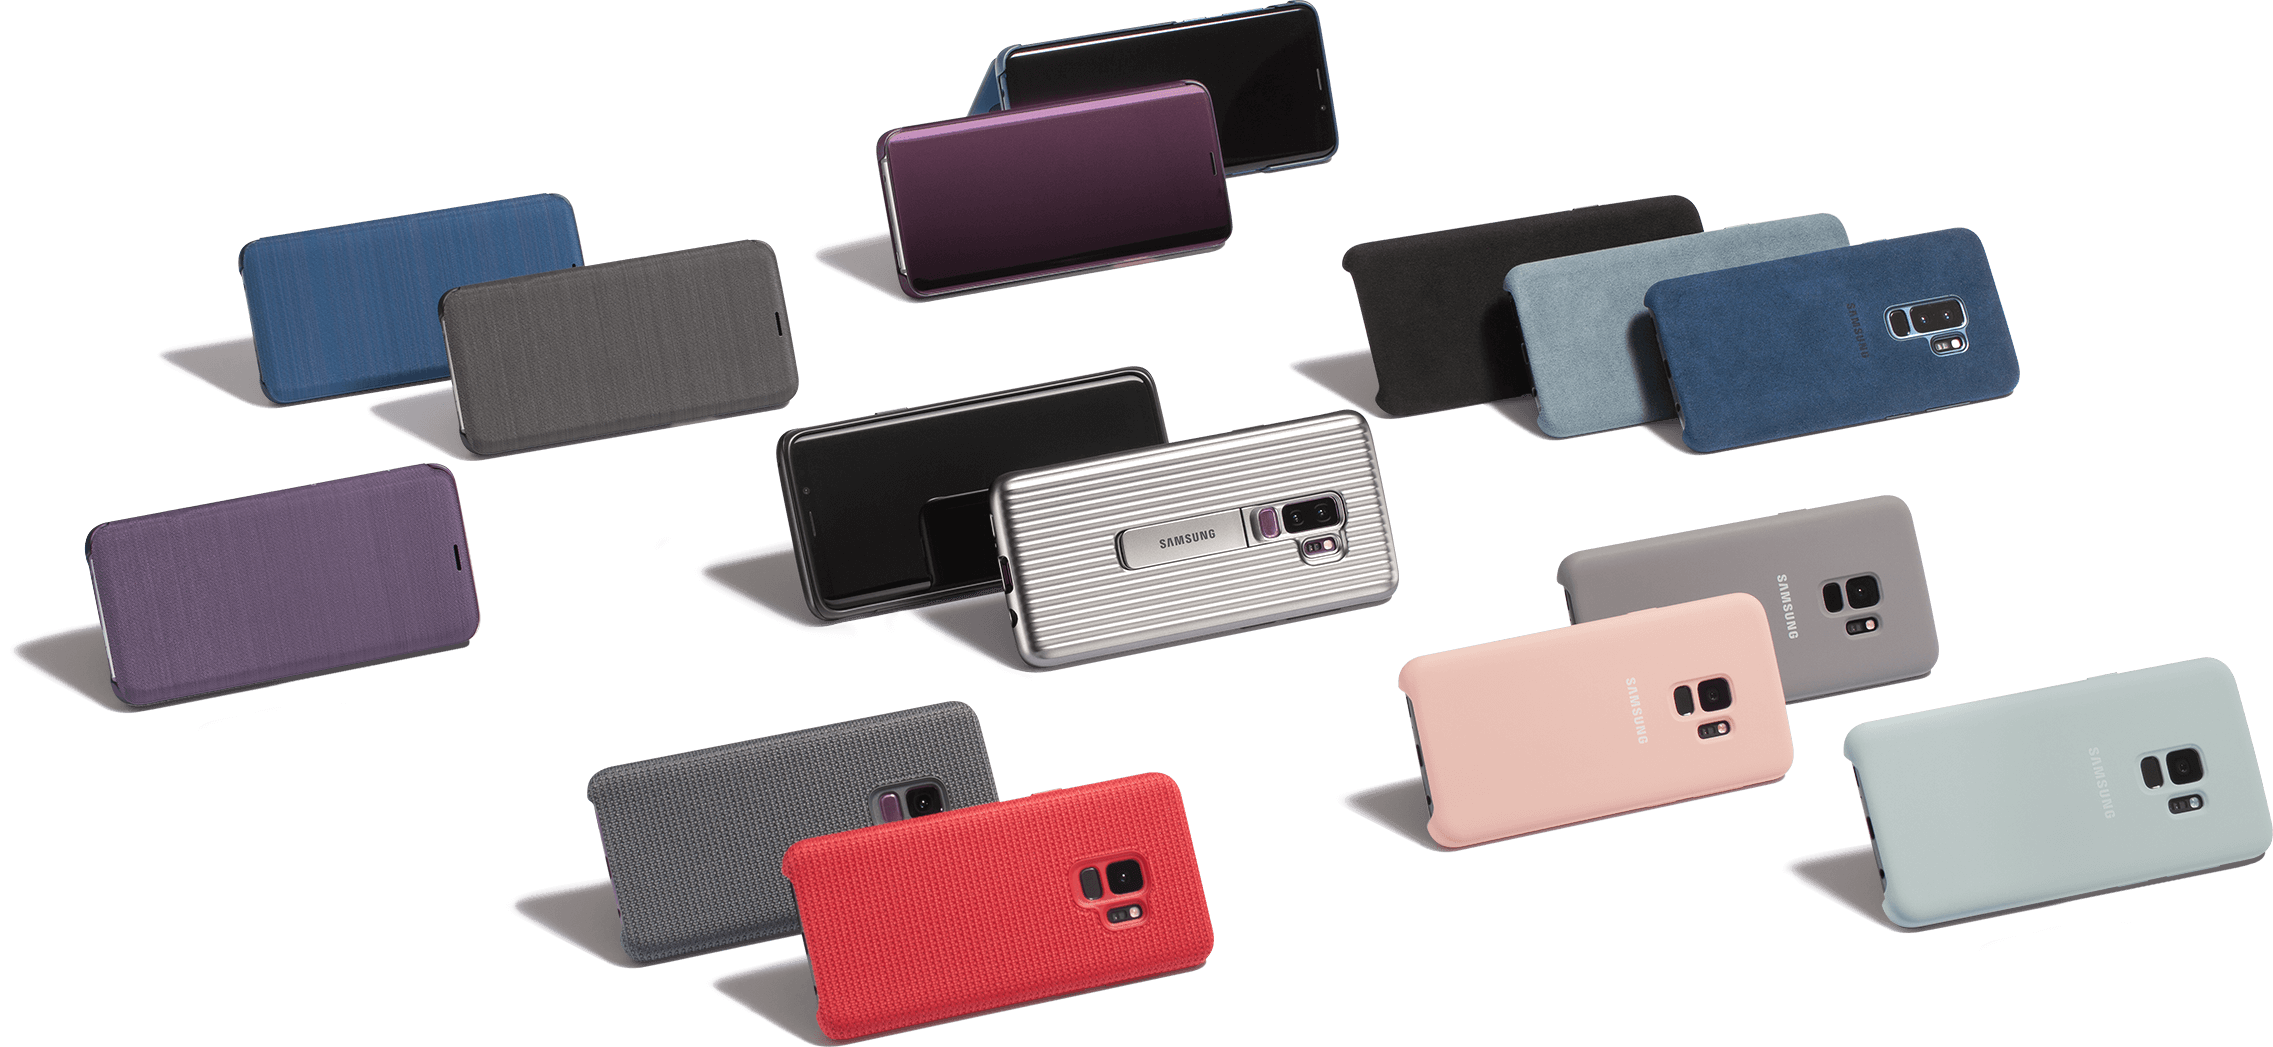 The galaxy s9’s covers are on display for each material and color.